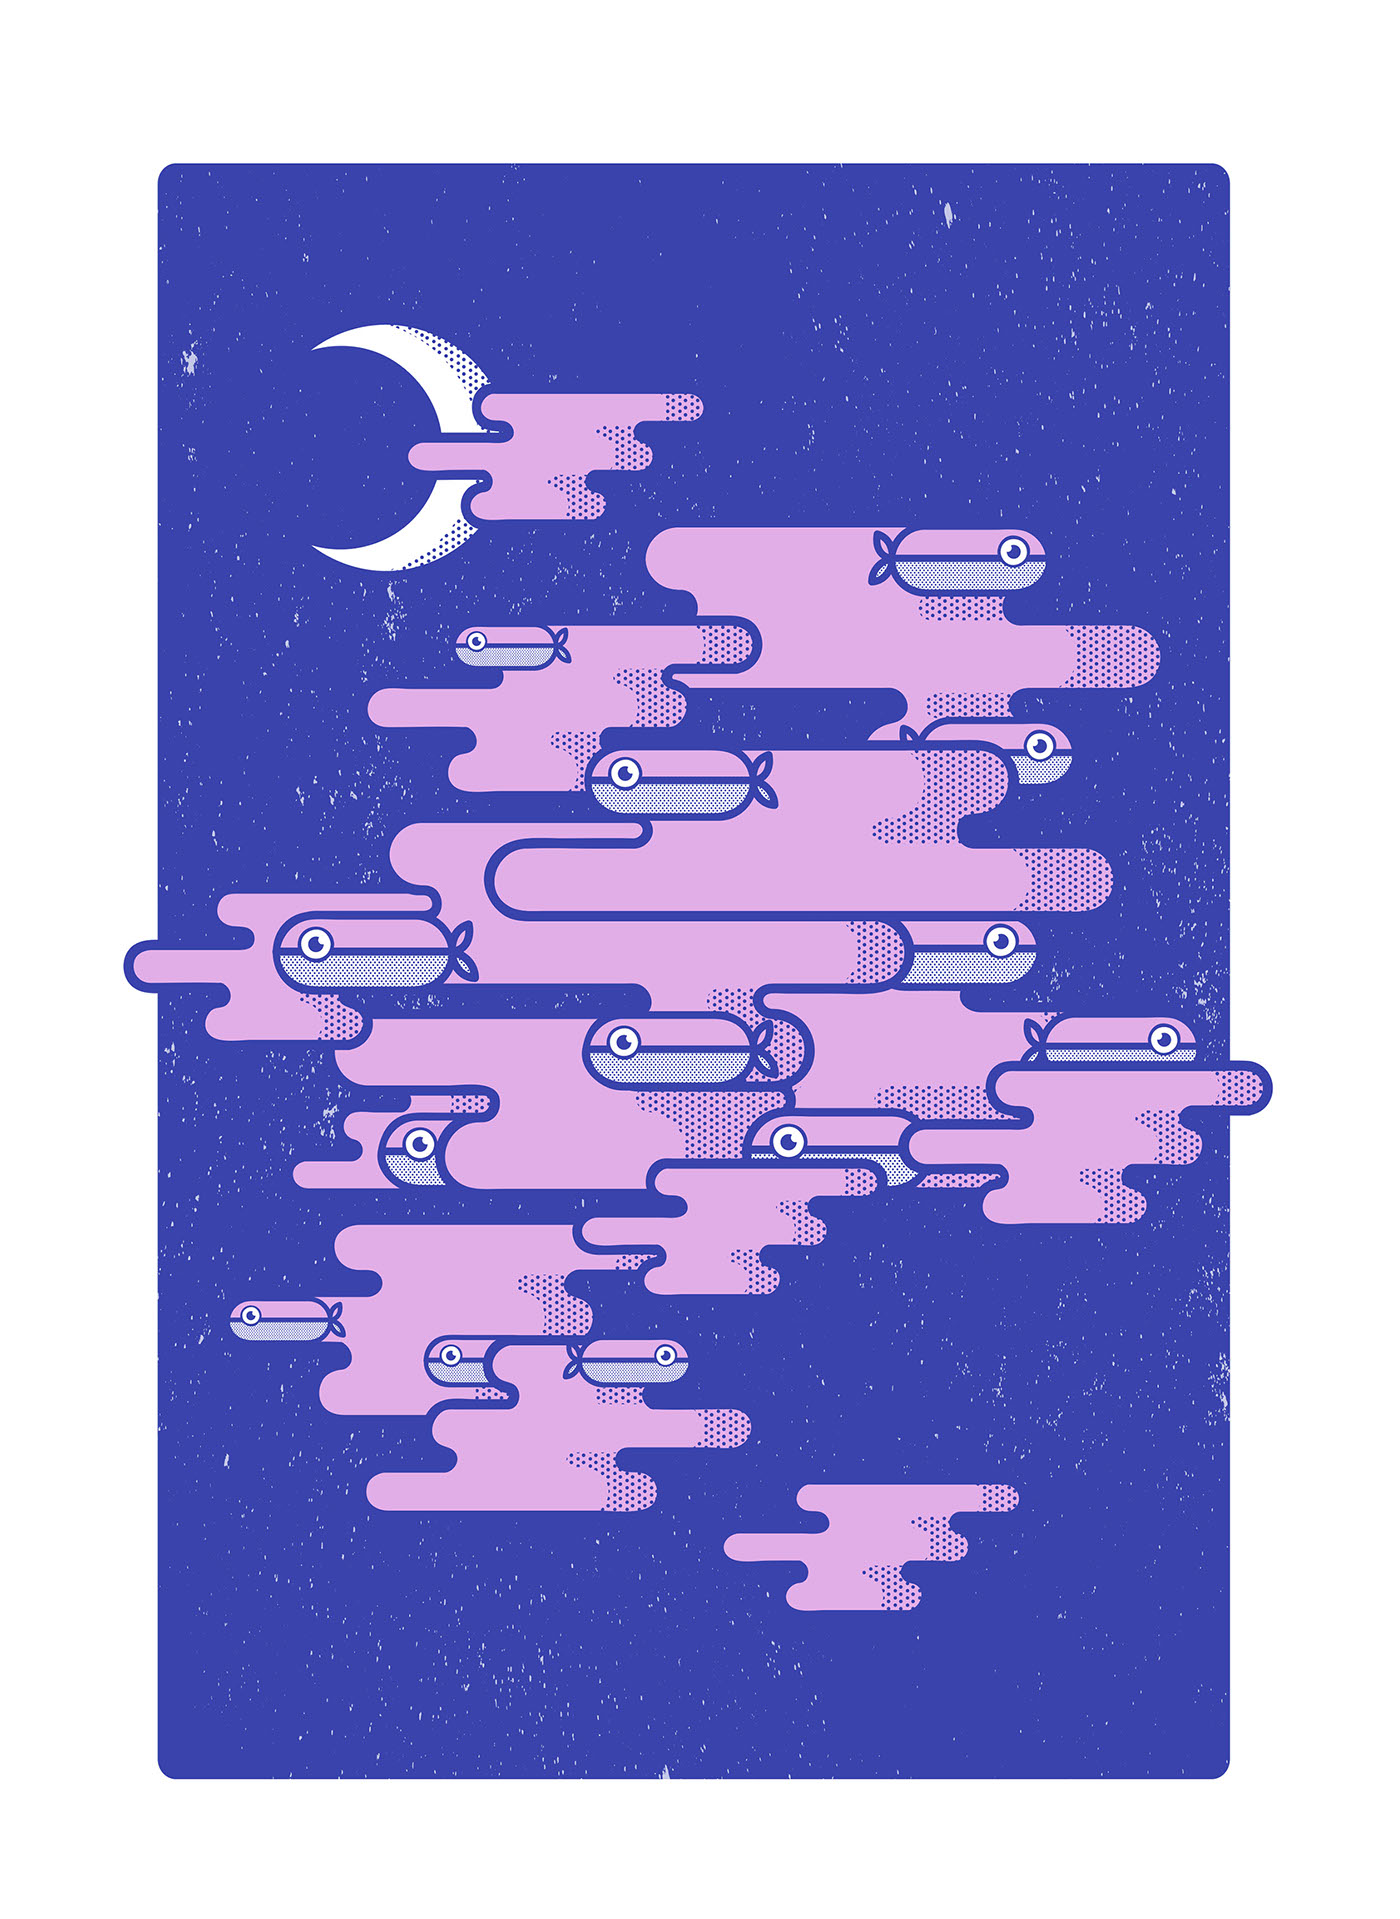 fish UQAM night nocturne moon pink halftone vector